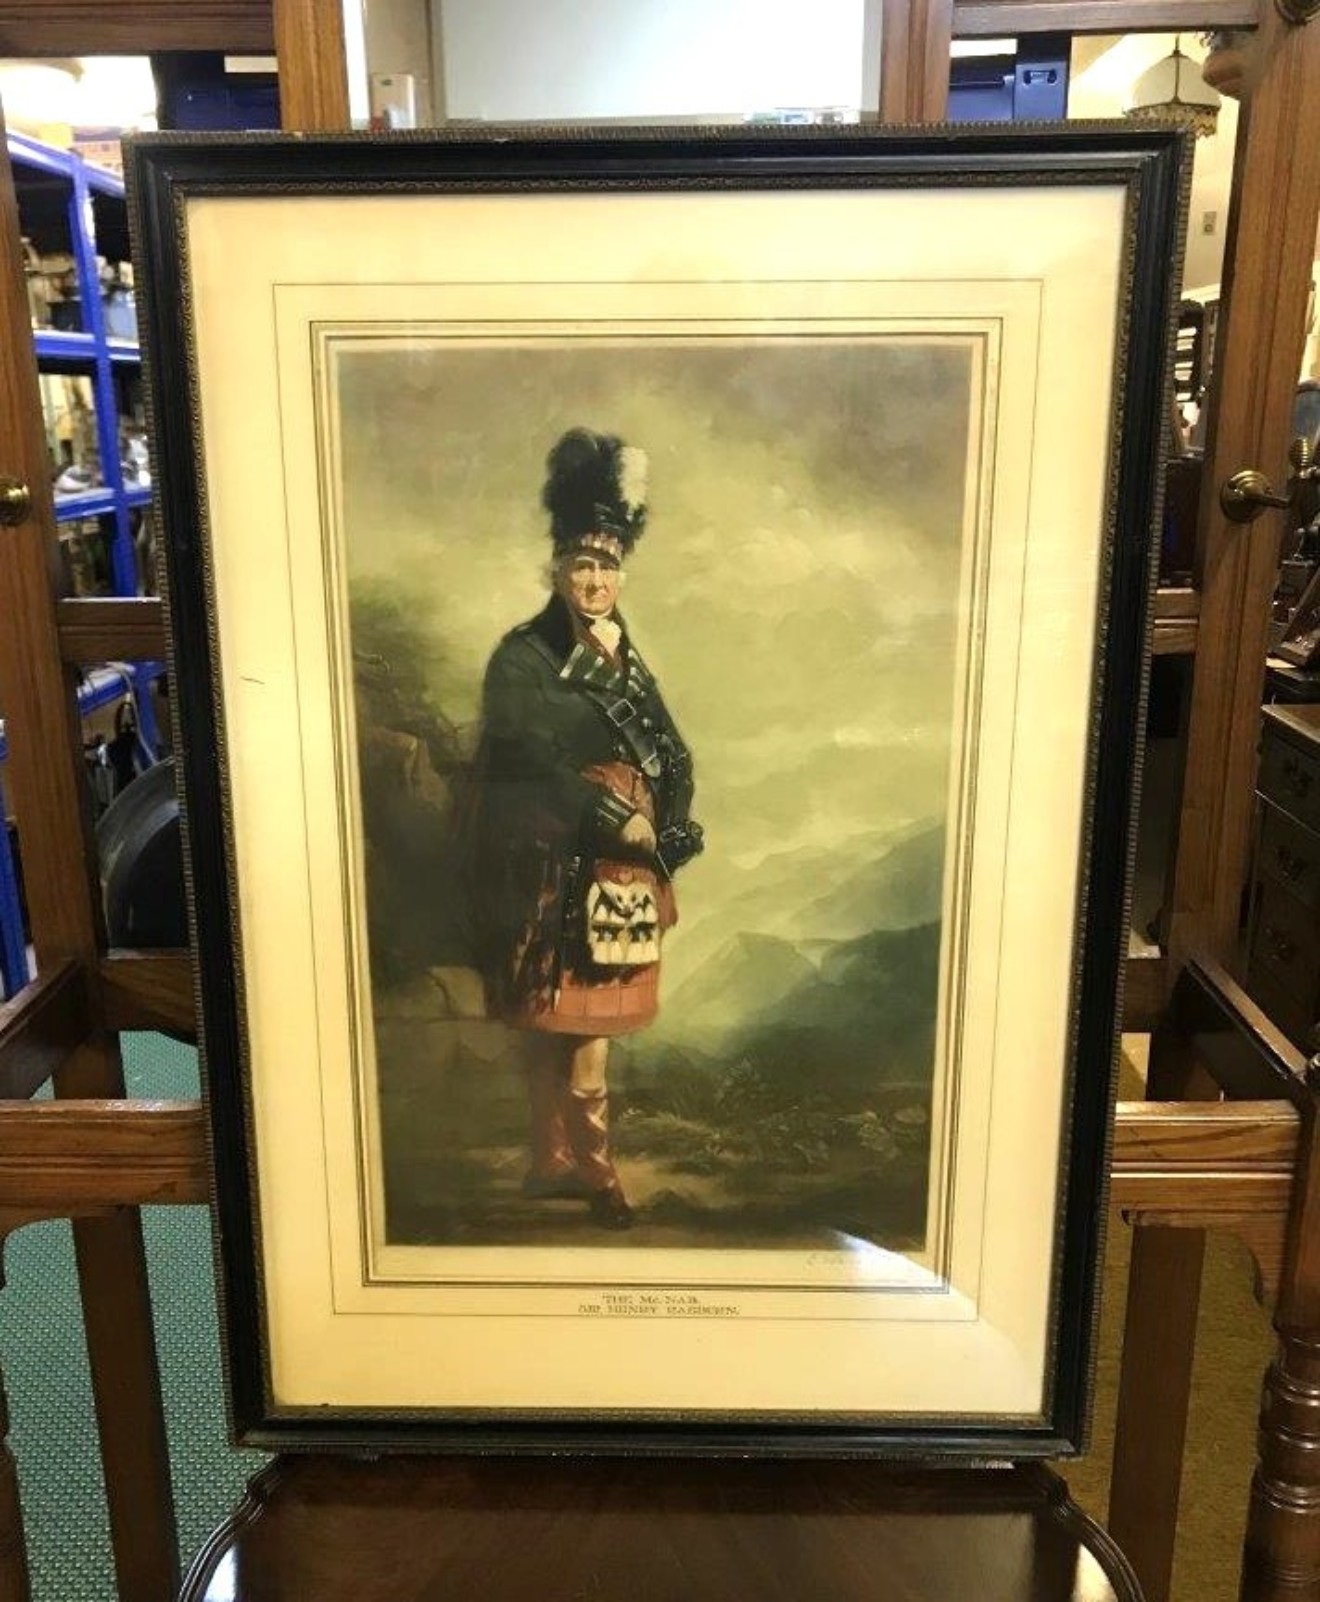 Antique Lithographic Print 'The McNab' depicting Francis McNab 12th Laird of McNab (1734-1816)